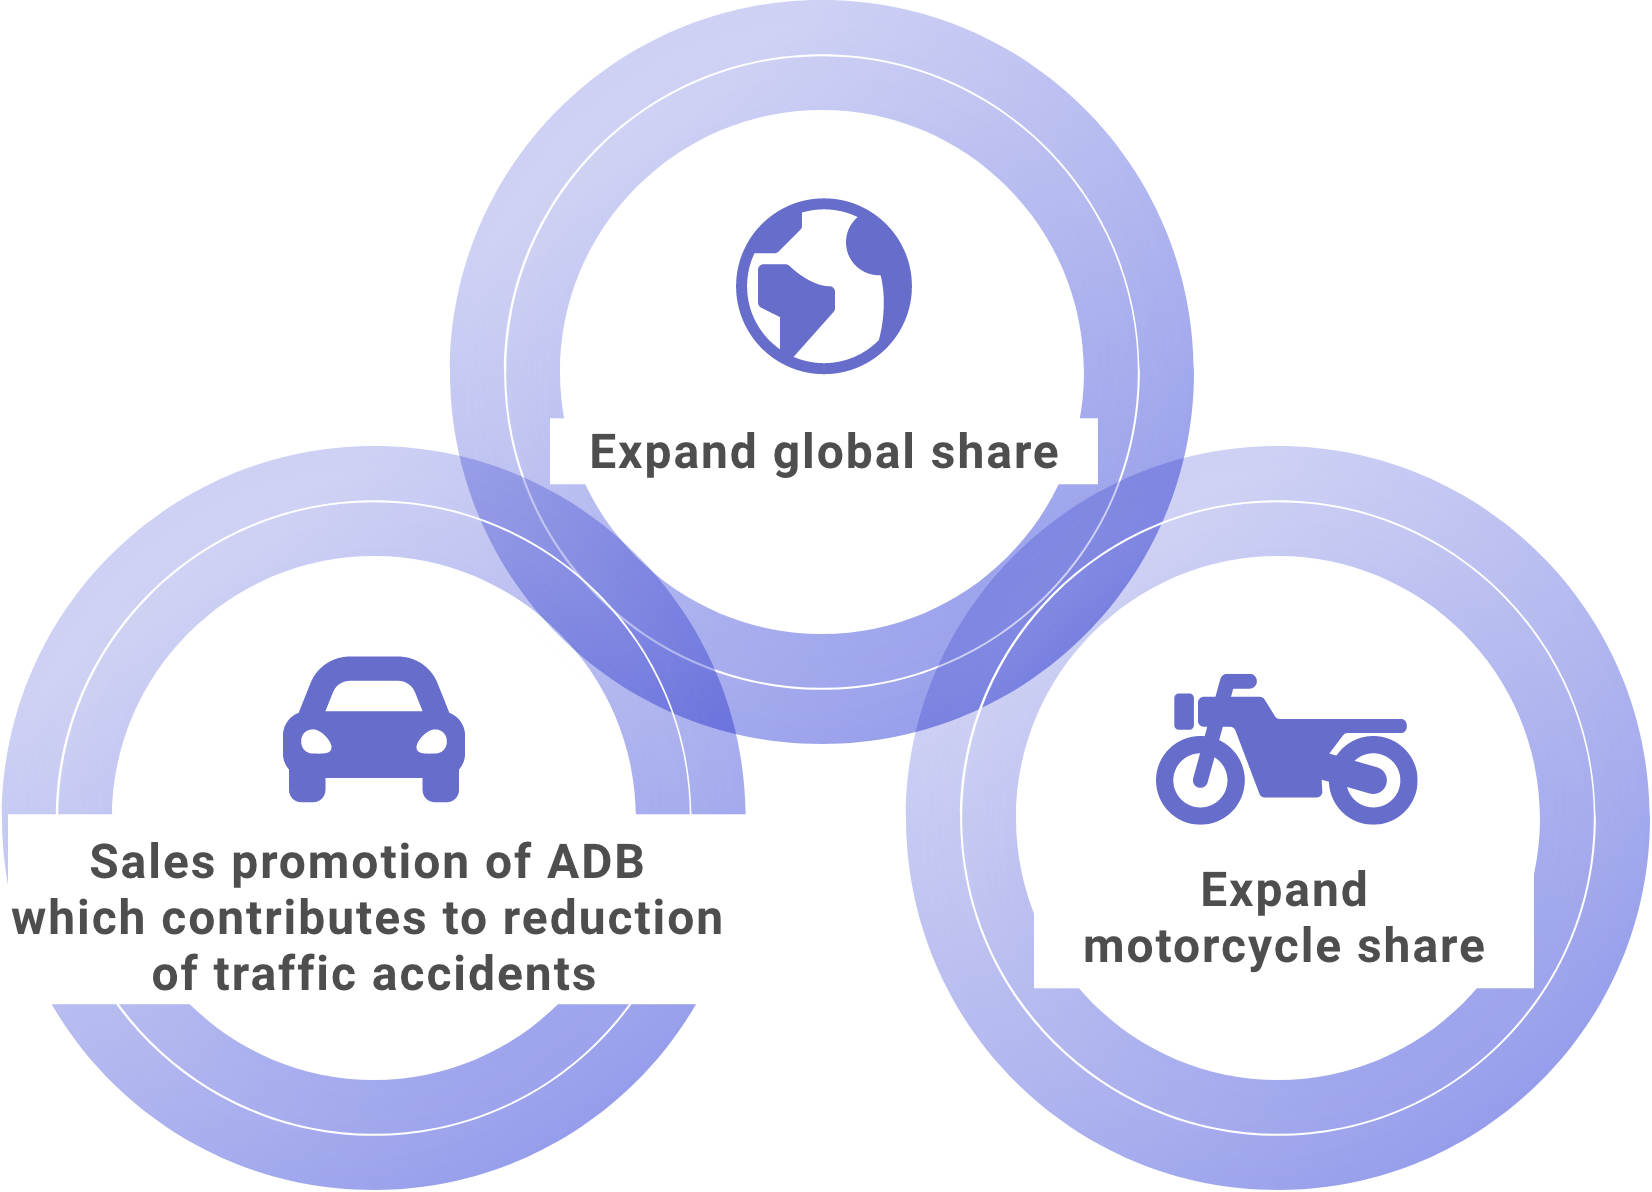 Expand global share, Sales promotion of ADB which contributes to reduction of traffic accidents, Expand motorcycle share